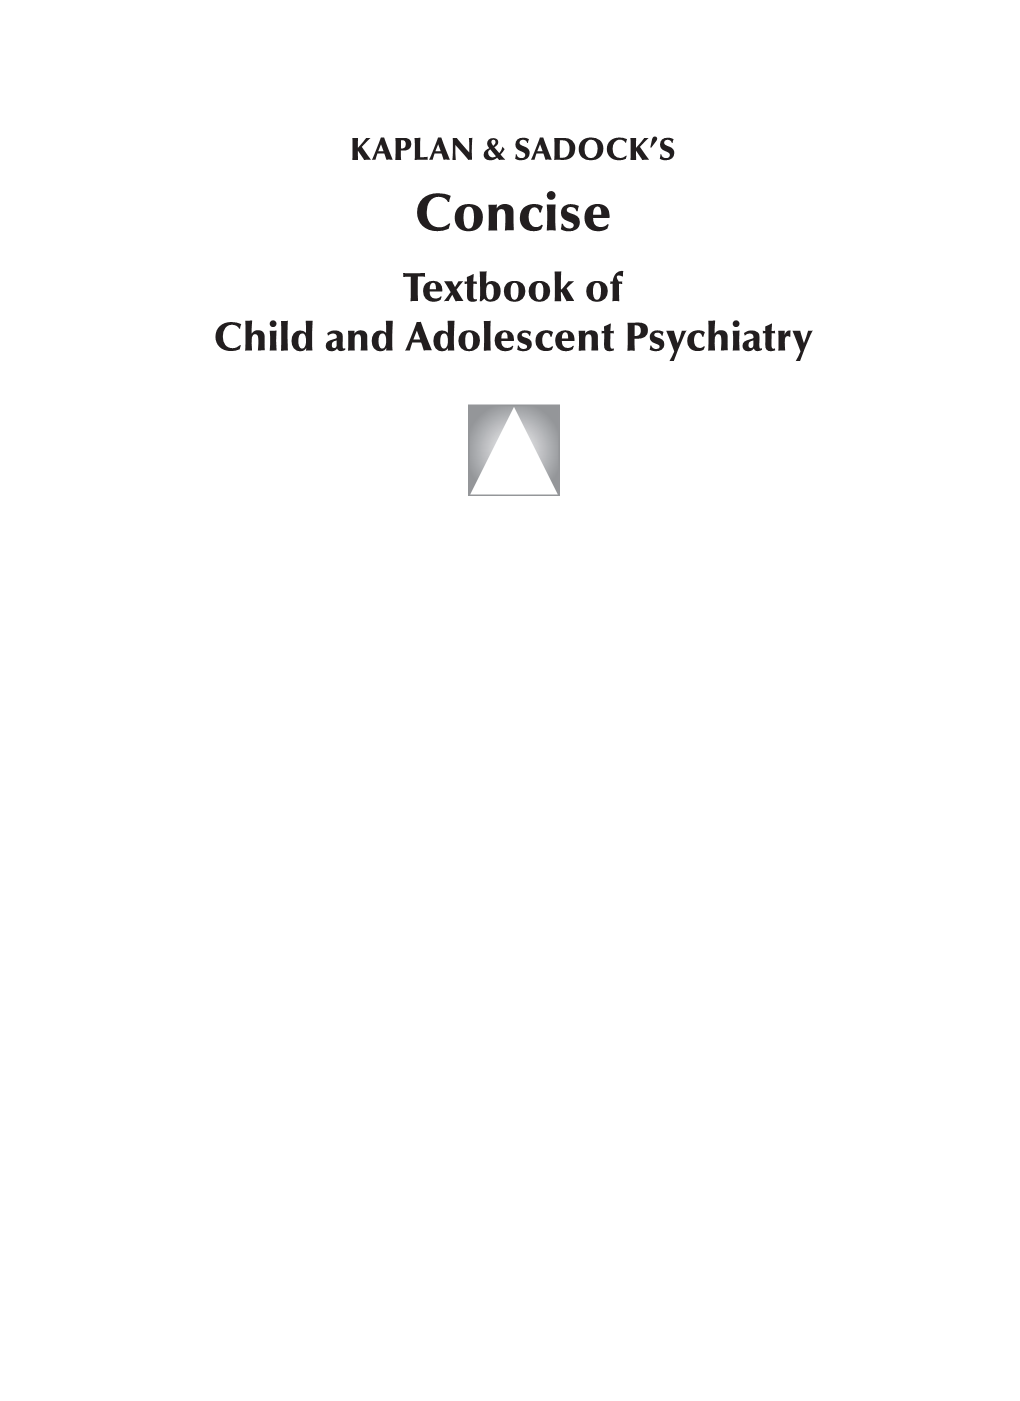 KAPLAN & SADOCK's Concise Textbook of Child and Adolescent